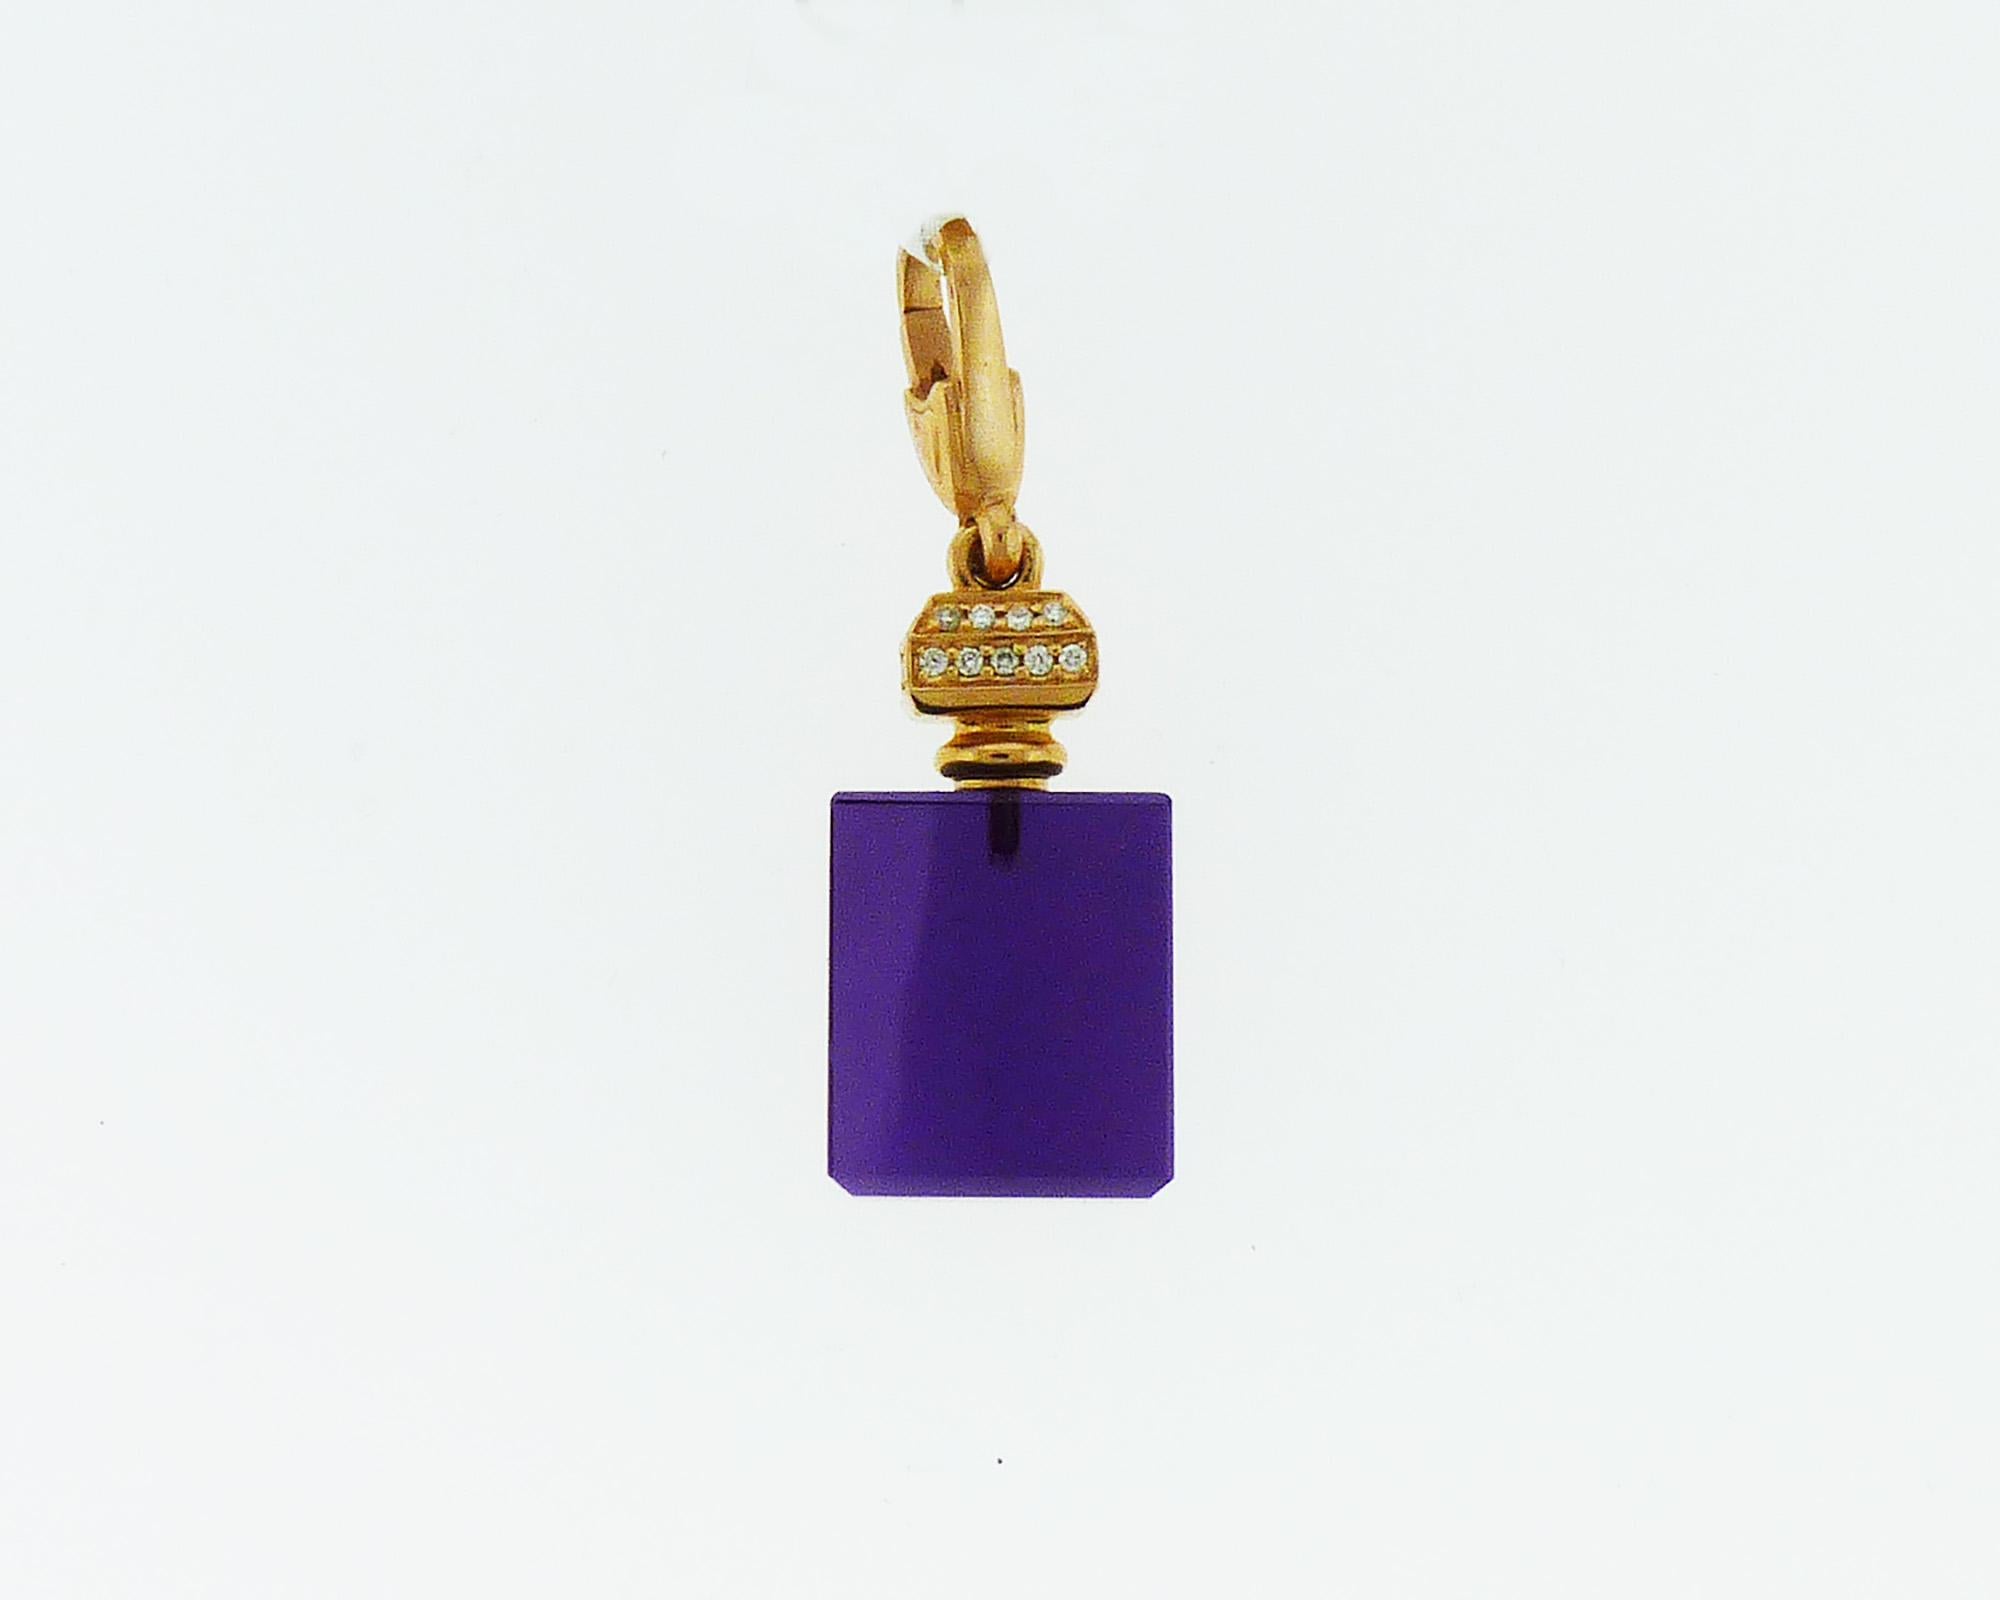 A necklace pendant in the shape of a perfume bottle available in different colors - purple, pink, yellow and blue. Made of quartz, 18K yellow, rose or white gold and embellished with white diamonds.
The cord is NOT included.
The pendants are sold